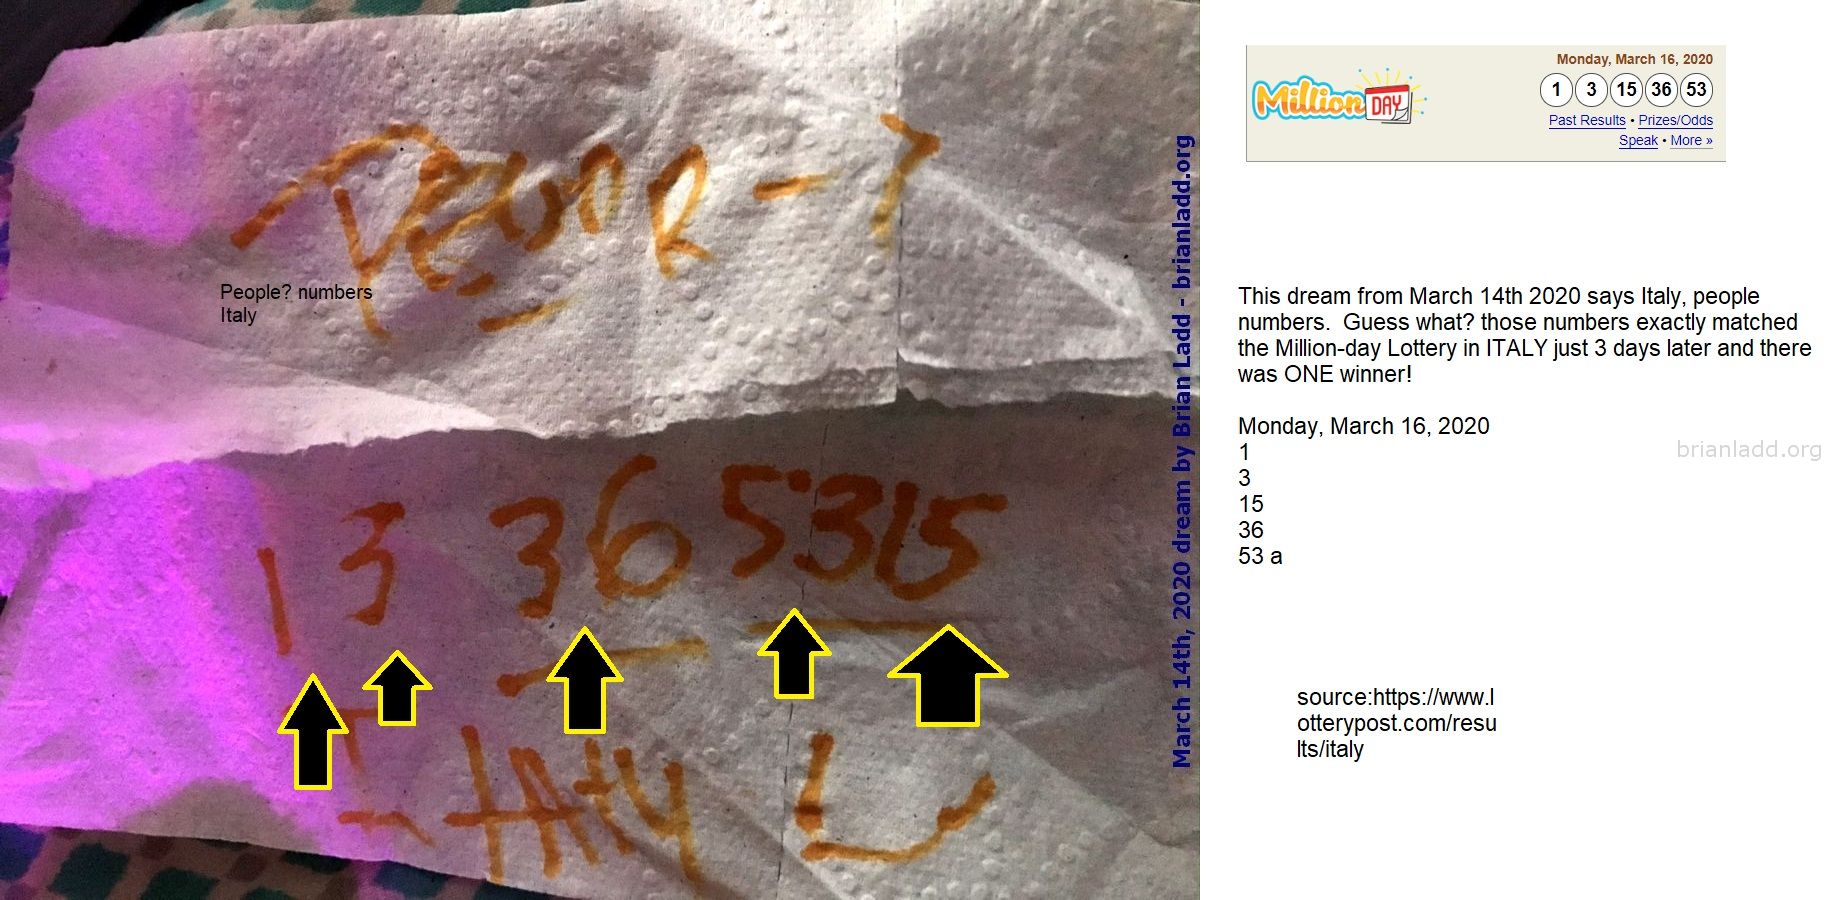 This Dream From March 14Th 2020 Says Italy People Numbers Guess What Those Numbers Exactly Matched The Million Day Lott...
Source  https://Www.Lotterypost.Com/Results/Italy  https://briansprediction.com/Editpics.Php?Album=2439 Need Winning Personal Numbers For Any Lottery? Visit This Page Now  https://briansprediction.com/Lottery  ( NEW!  Free lottery picks by mail, I will personally fill out your blank lottery sheet and mail it back to you for free, postage is included!  visit  https://briansprediction.com/picksbymail   )
